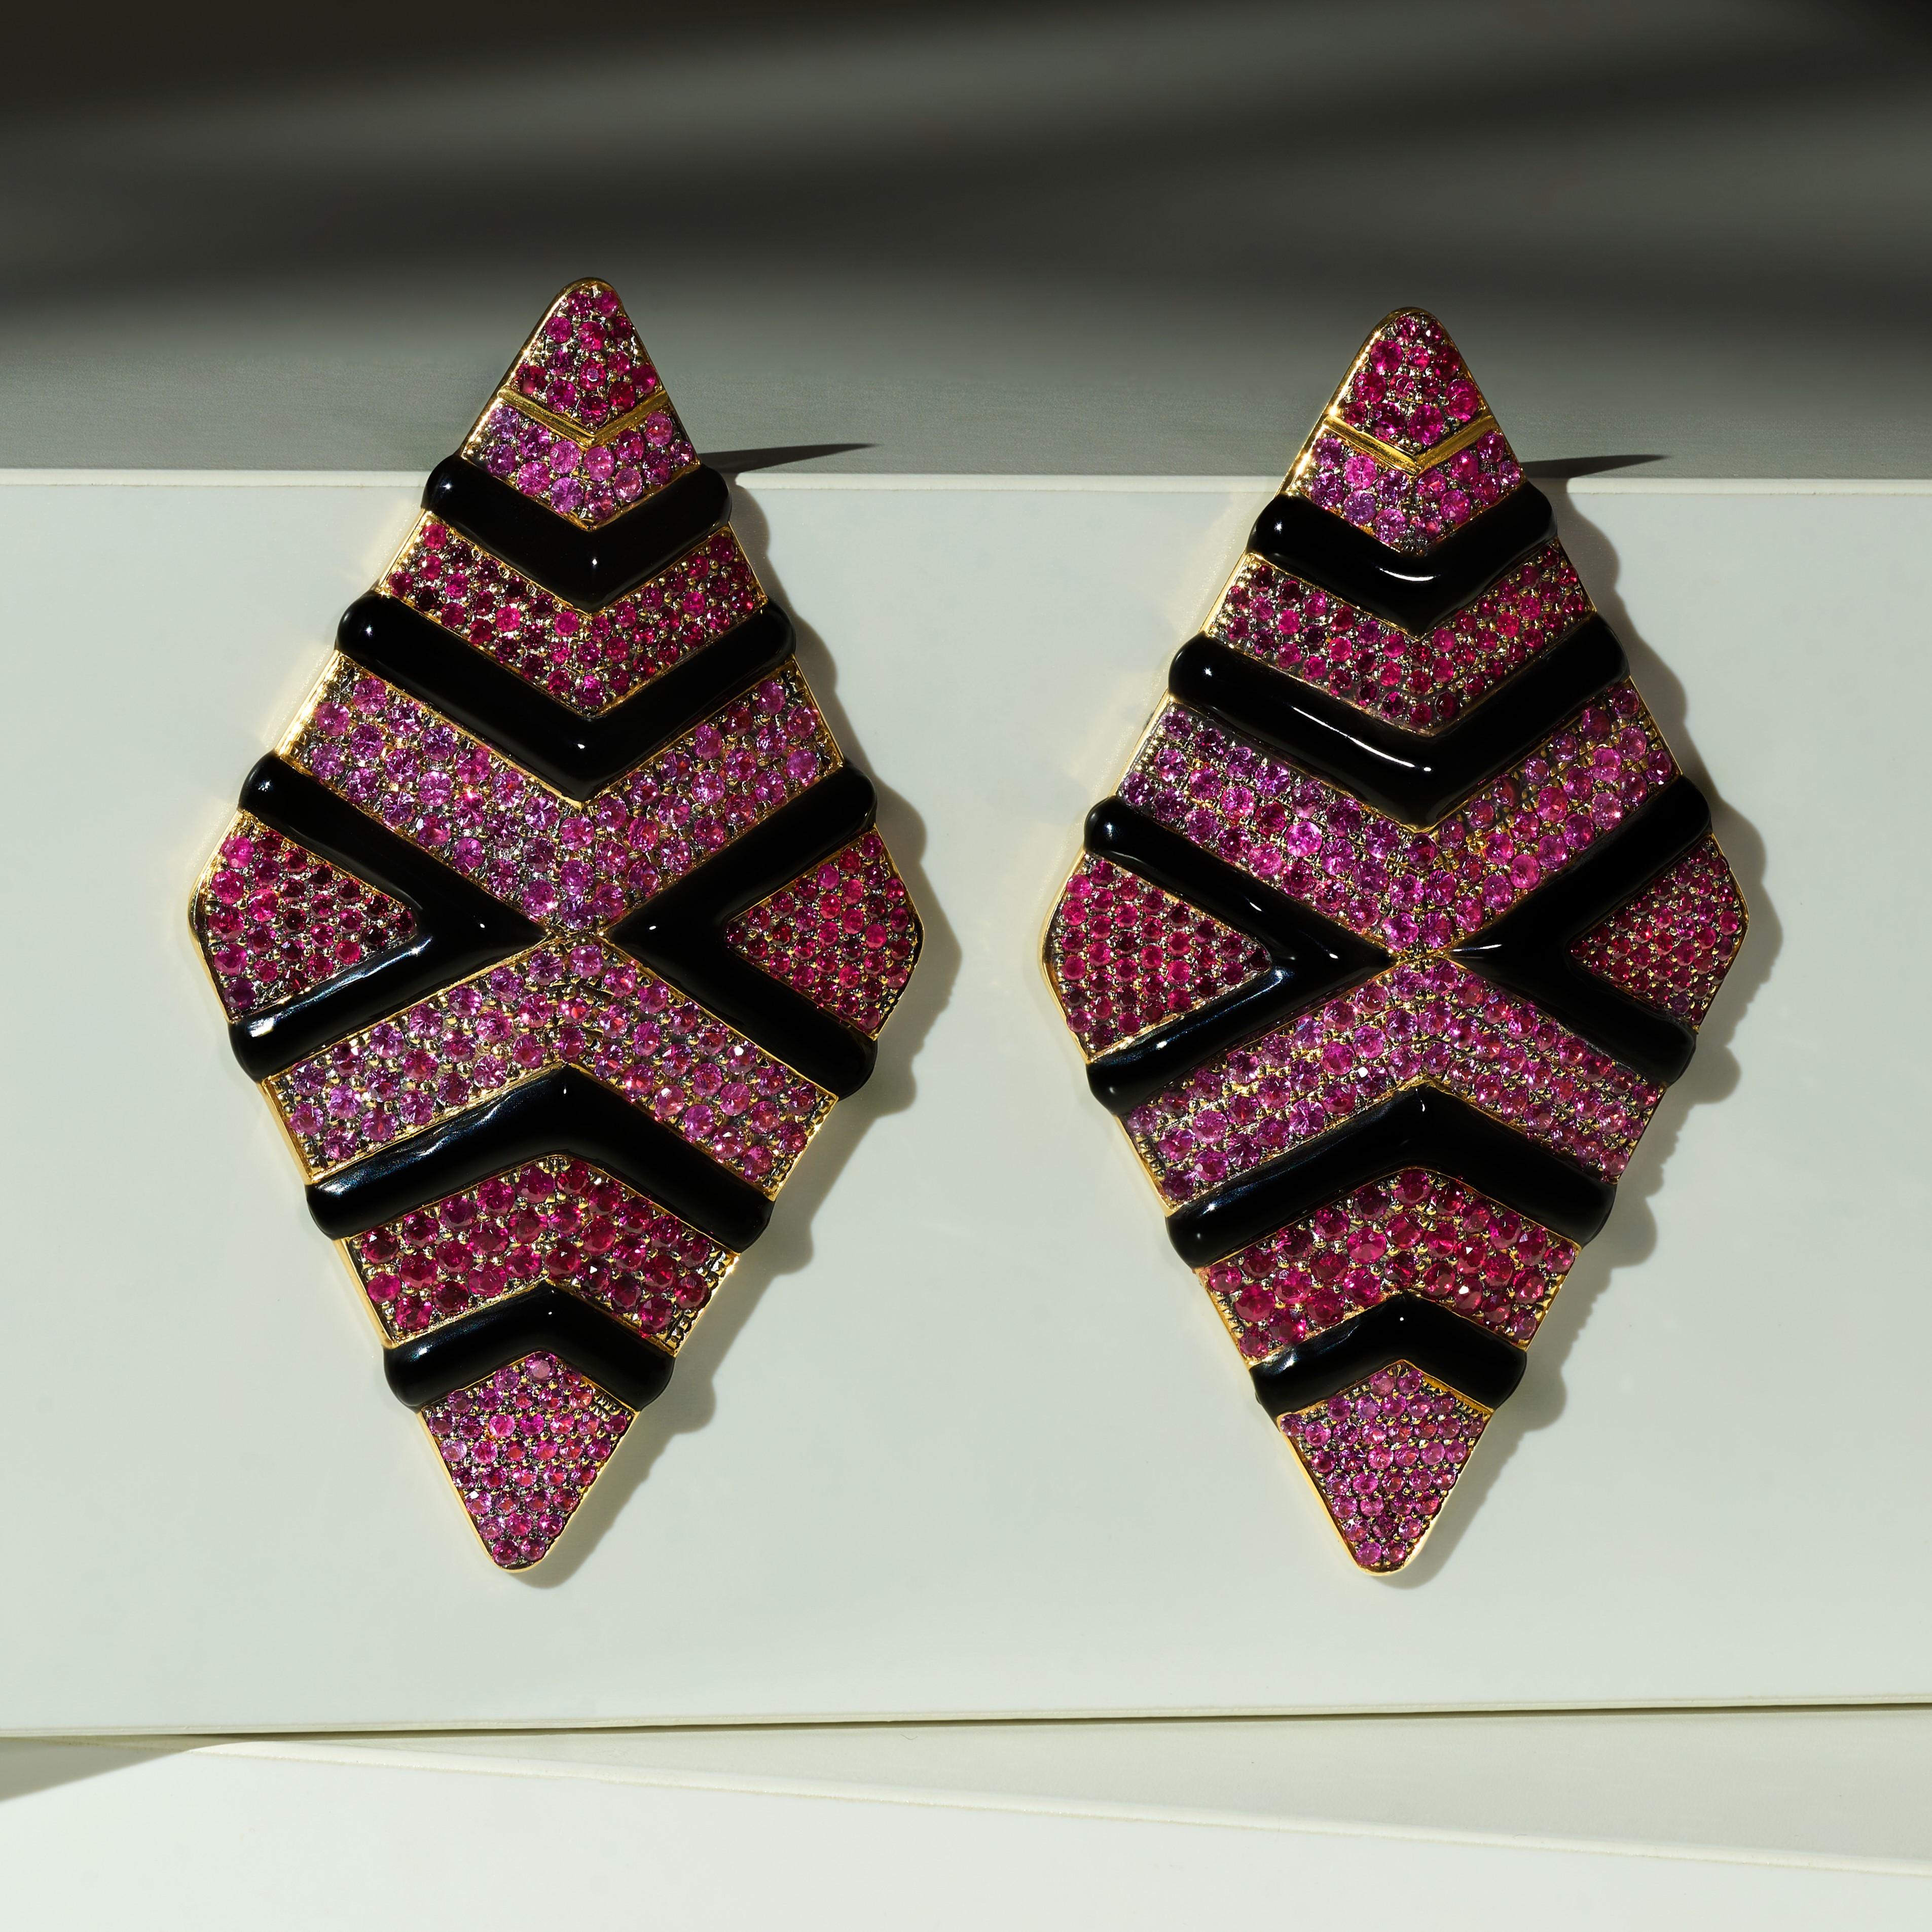 A unique drop Earrings by Rosior Portugal set in Yellow Gold and Black Ceramic with:
- 297 rubies weighing 2,58 ct;
- 282 pink sapphires weighing 3,23 ct.
Weight in 19.2k gold: 19.9 g.
These earrings are new and are an unique piece.
Stamped by the